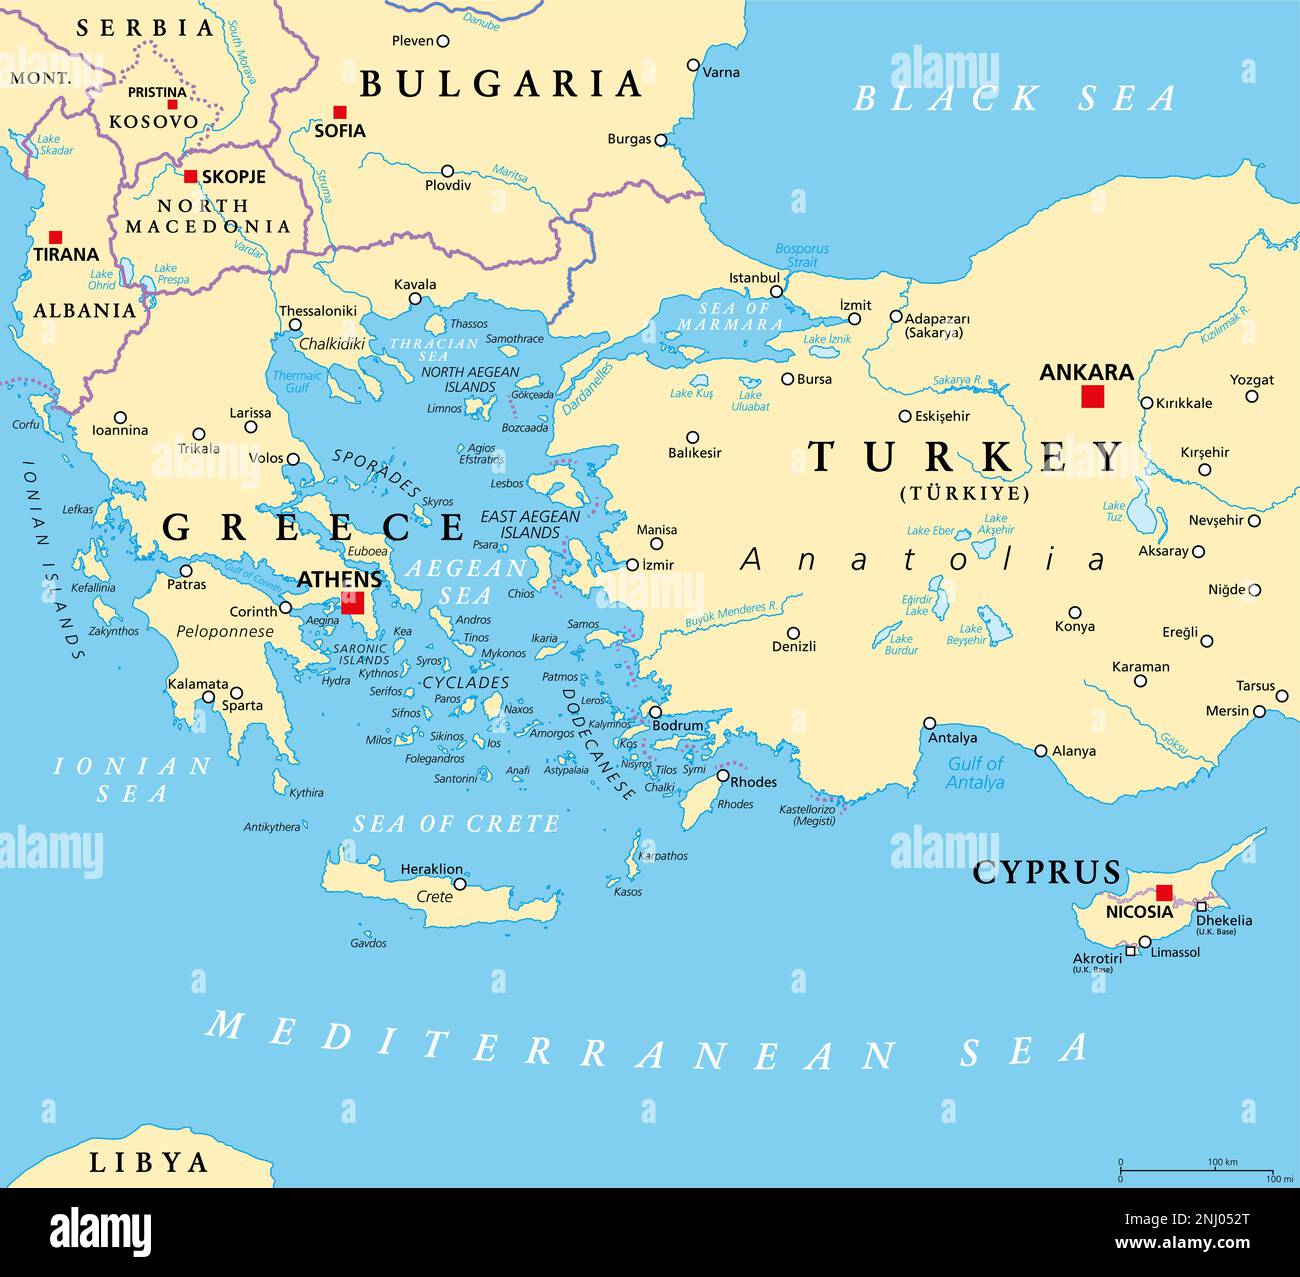 Aegean Sea region with Aegean Islands, political map. An elongated embayment of the Mediterranean Sea, located between Europe and Asia. Stock Photo